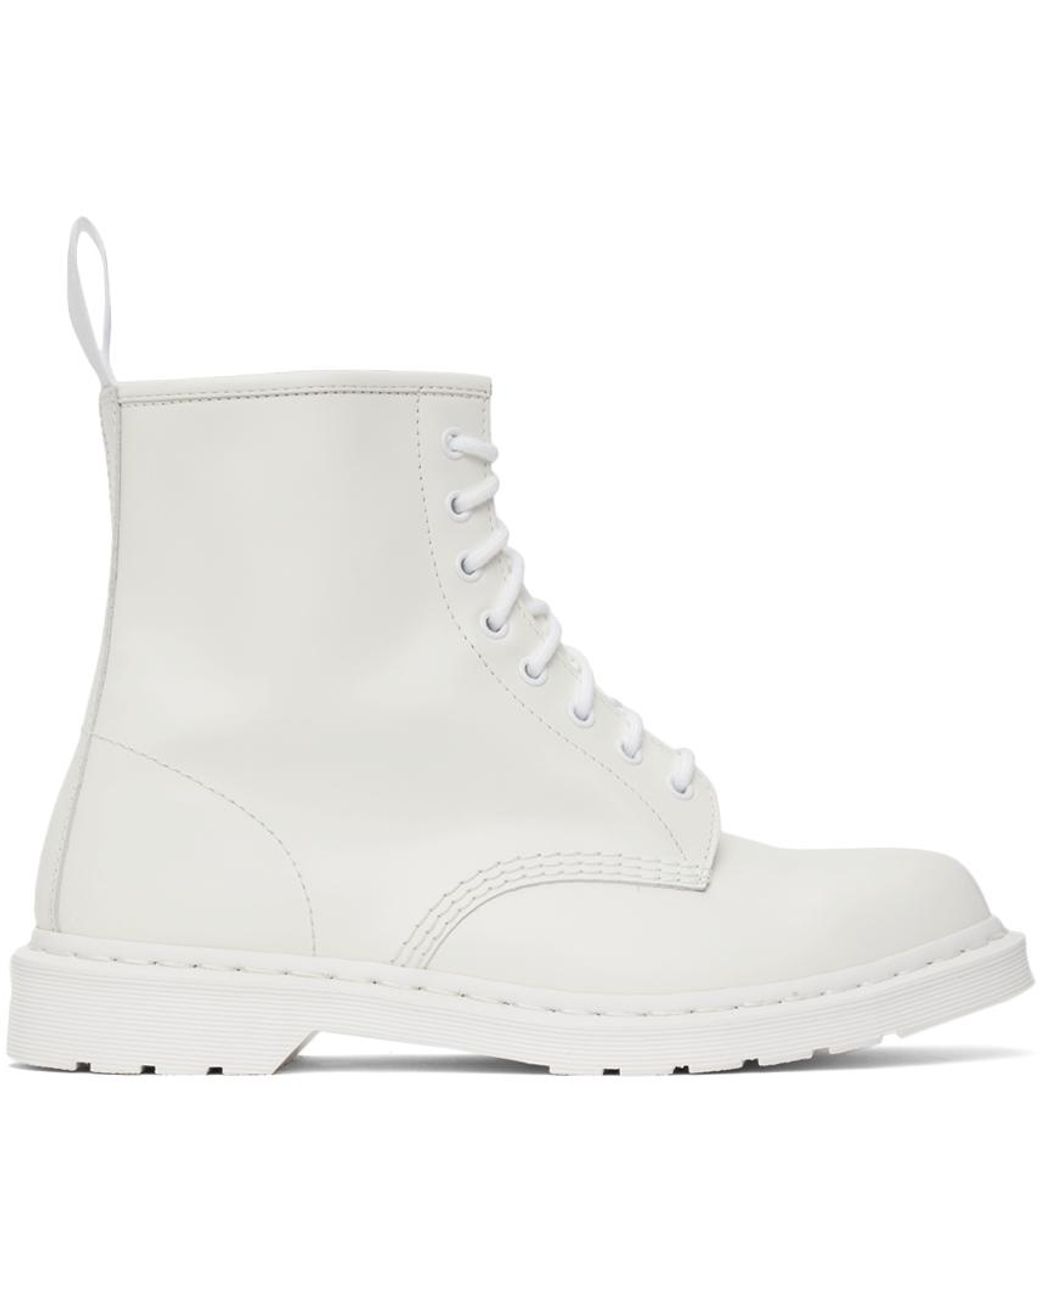 Dr. Martens Leather Mono 1460 Boots in White for Men - Lyst